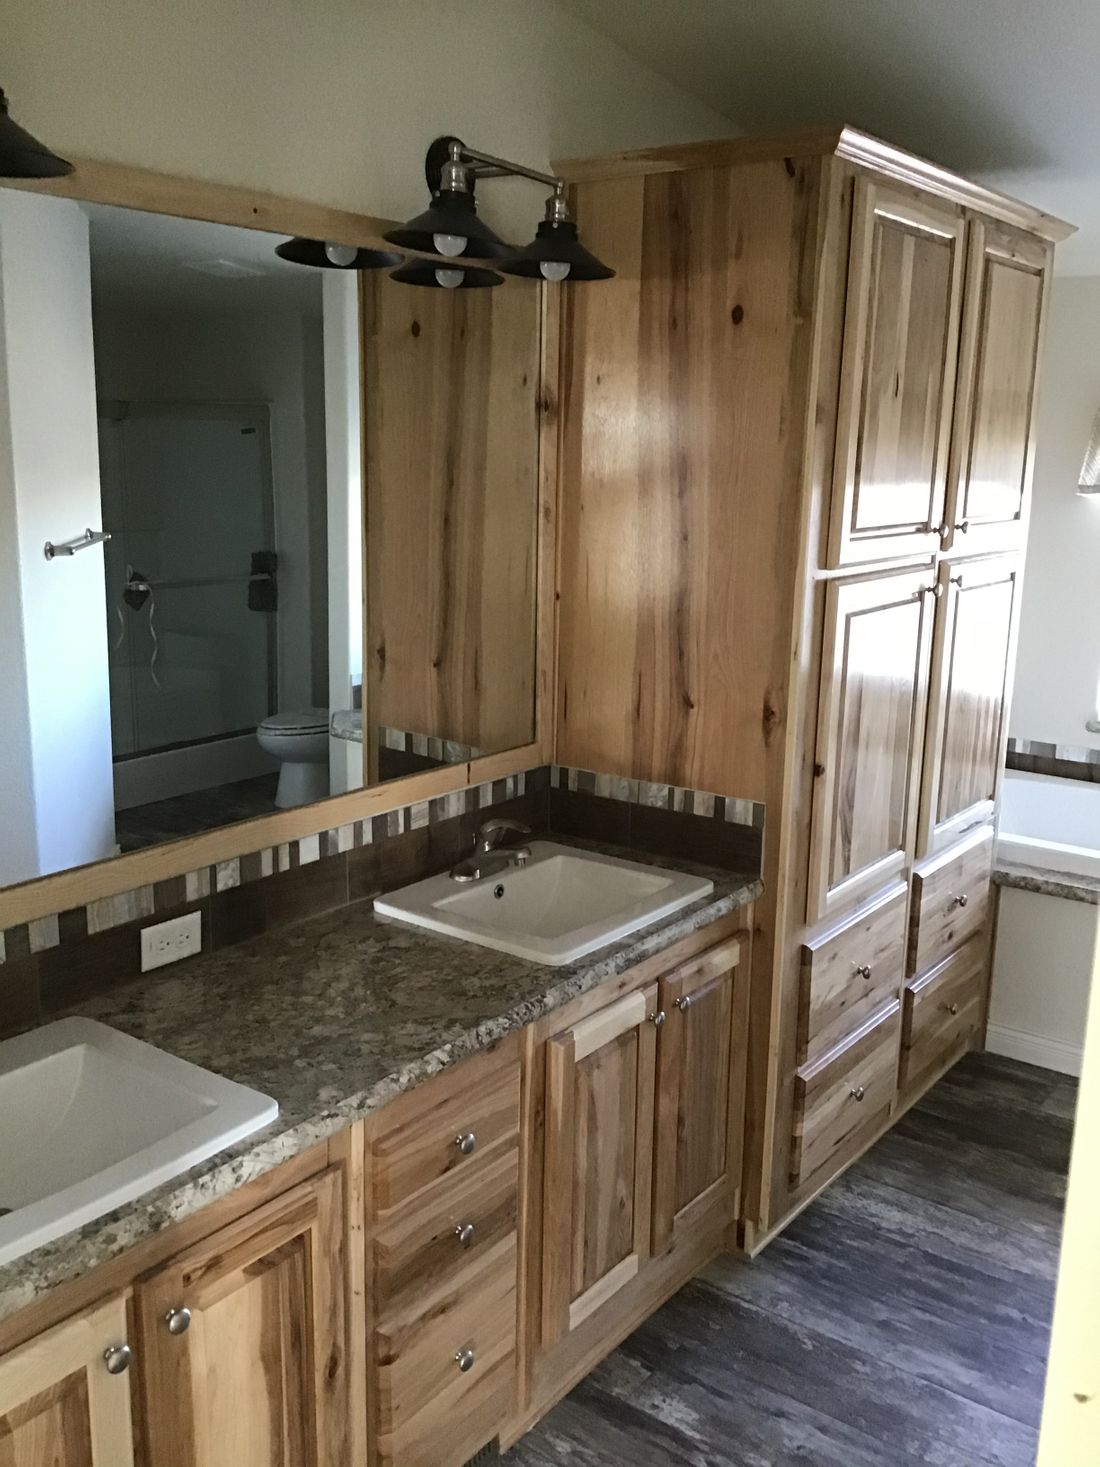 The 2022 COLUMBIA RIVER Master Bathroom. This Manufactured Mobile Home features 3 bedrooms and 2 baths.